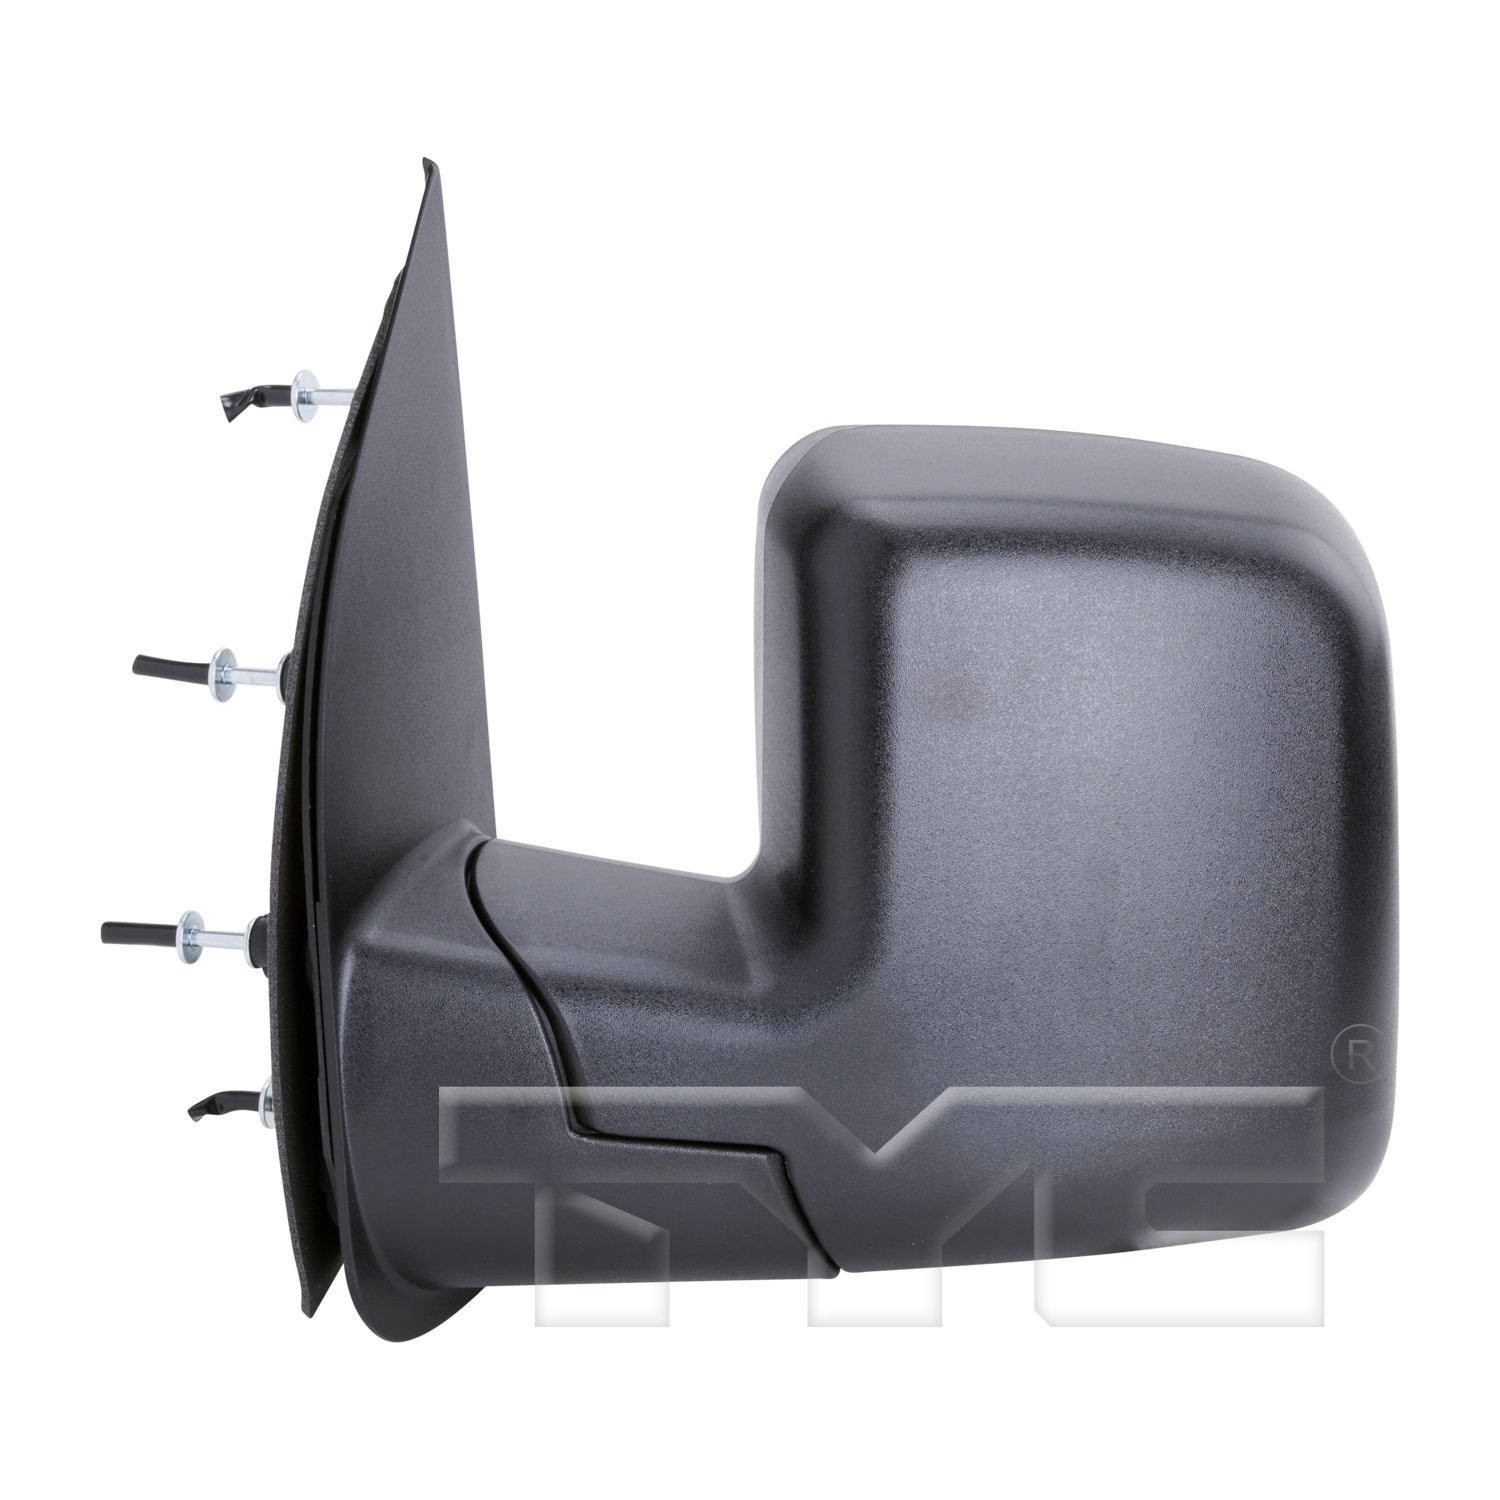 Aftermarket MIRRORS for FORD - E-350 ECONOLINE CLUB WAGON, E-350 ECONOLINE CLUB WAGON,02-02,LT Mirror outside rear view